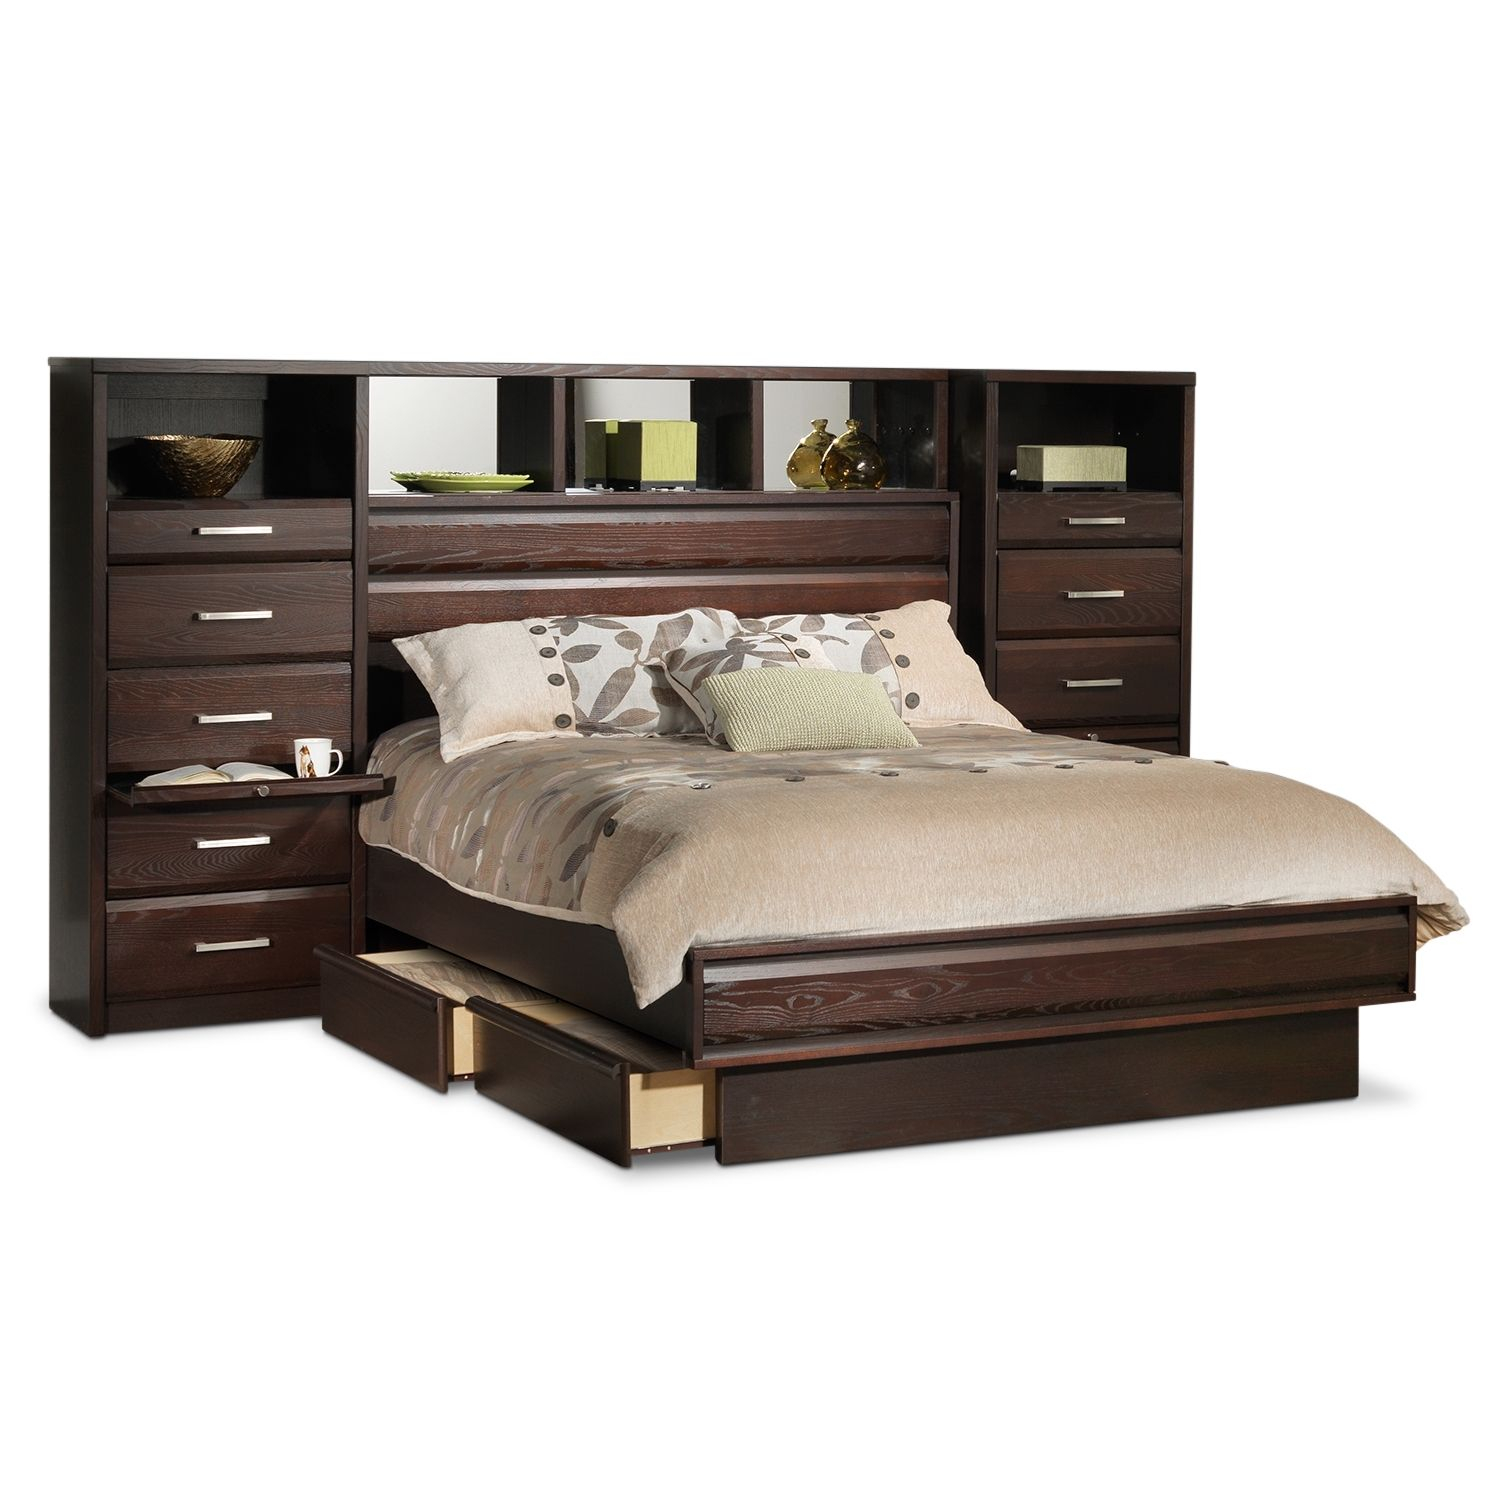 Tango Bedroom Queen Wall Bed Leons Home Bed Closet in sizing 1500 X 1500